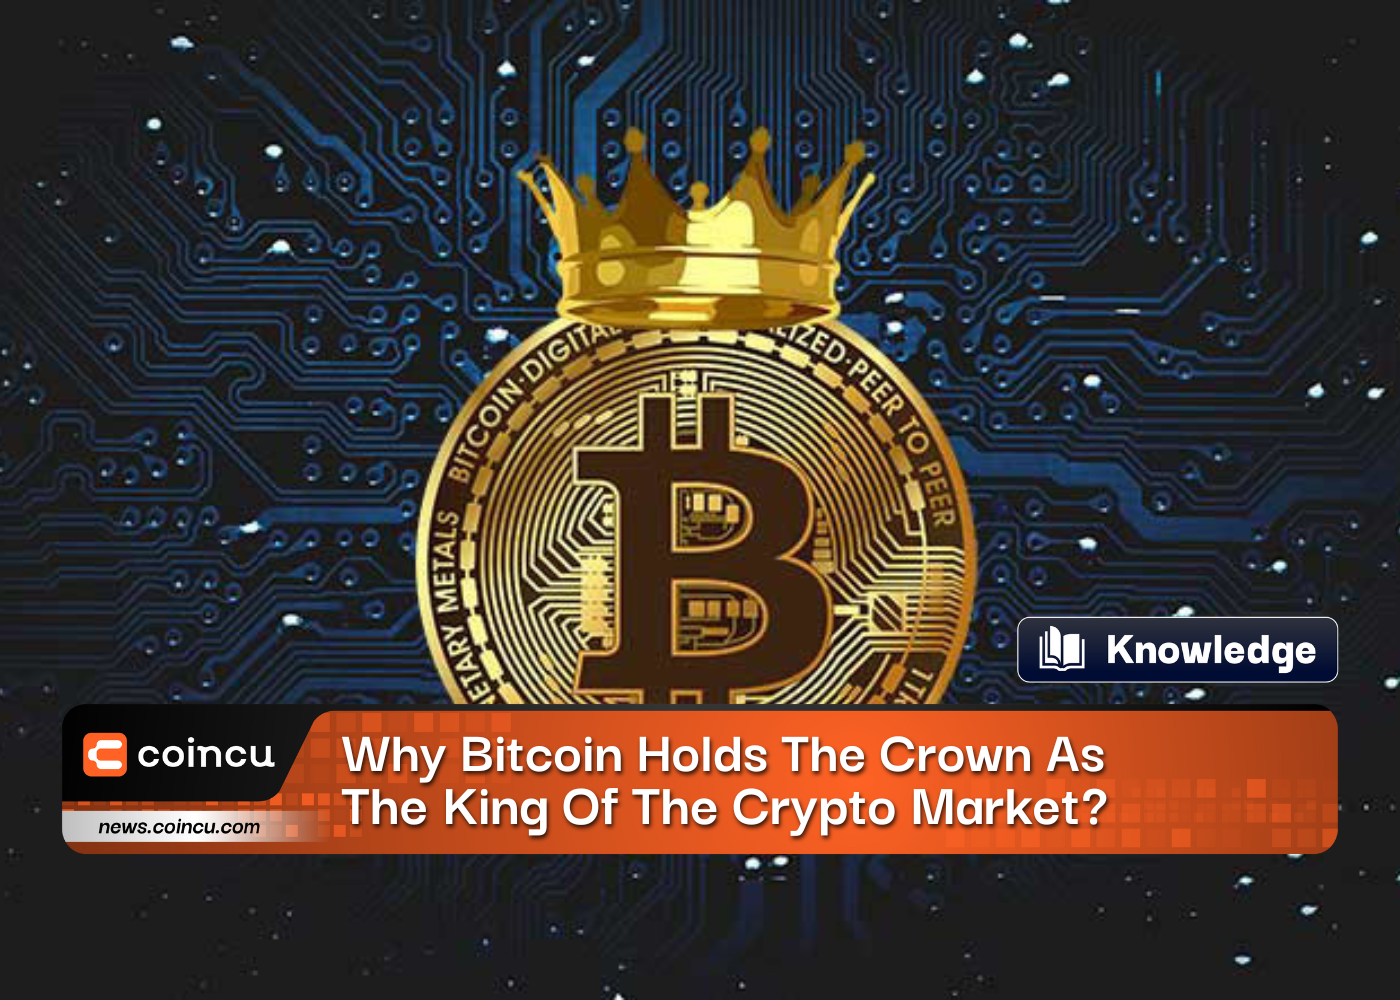 Why Bitcoin Holds The Crown As